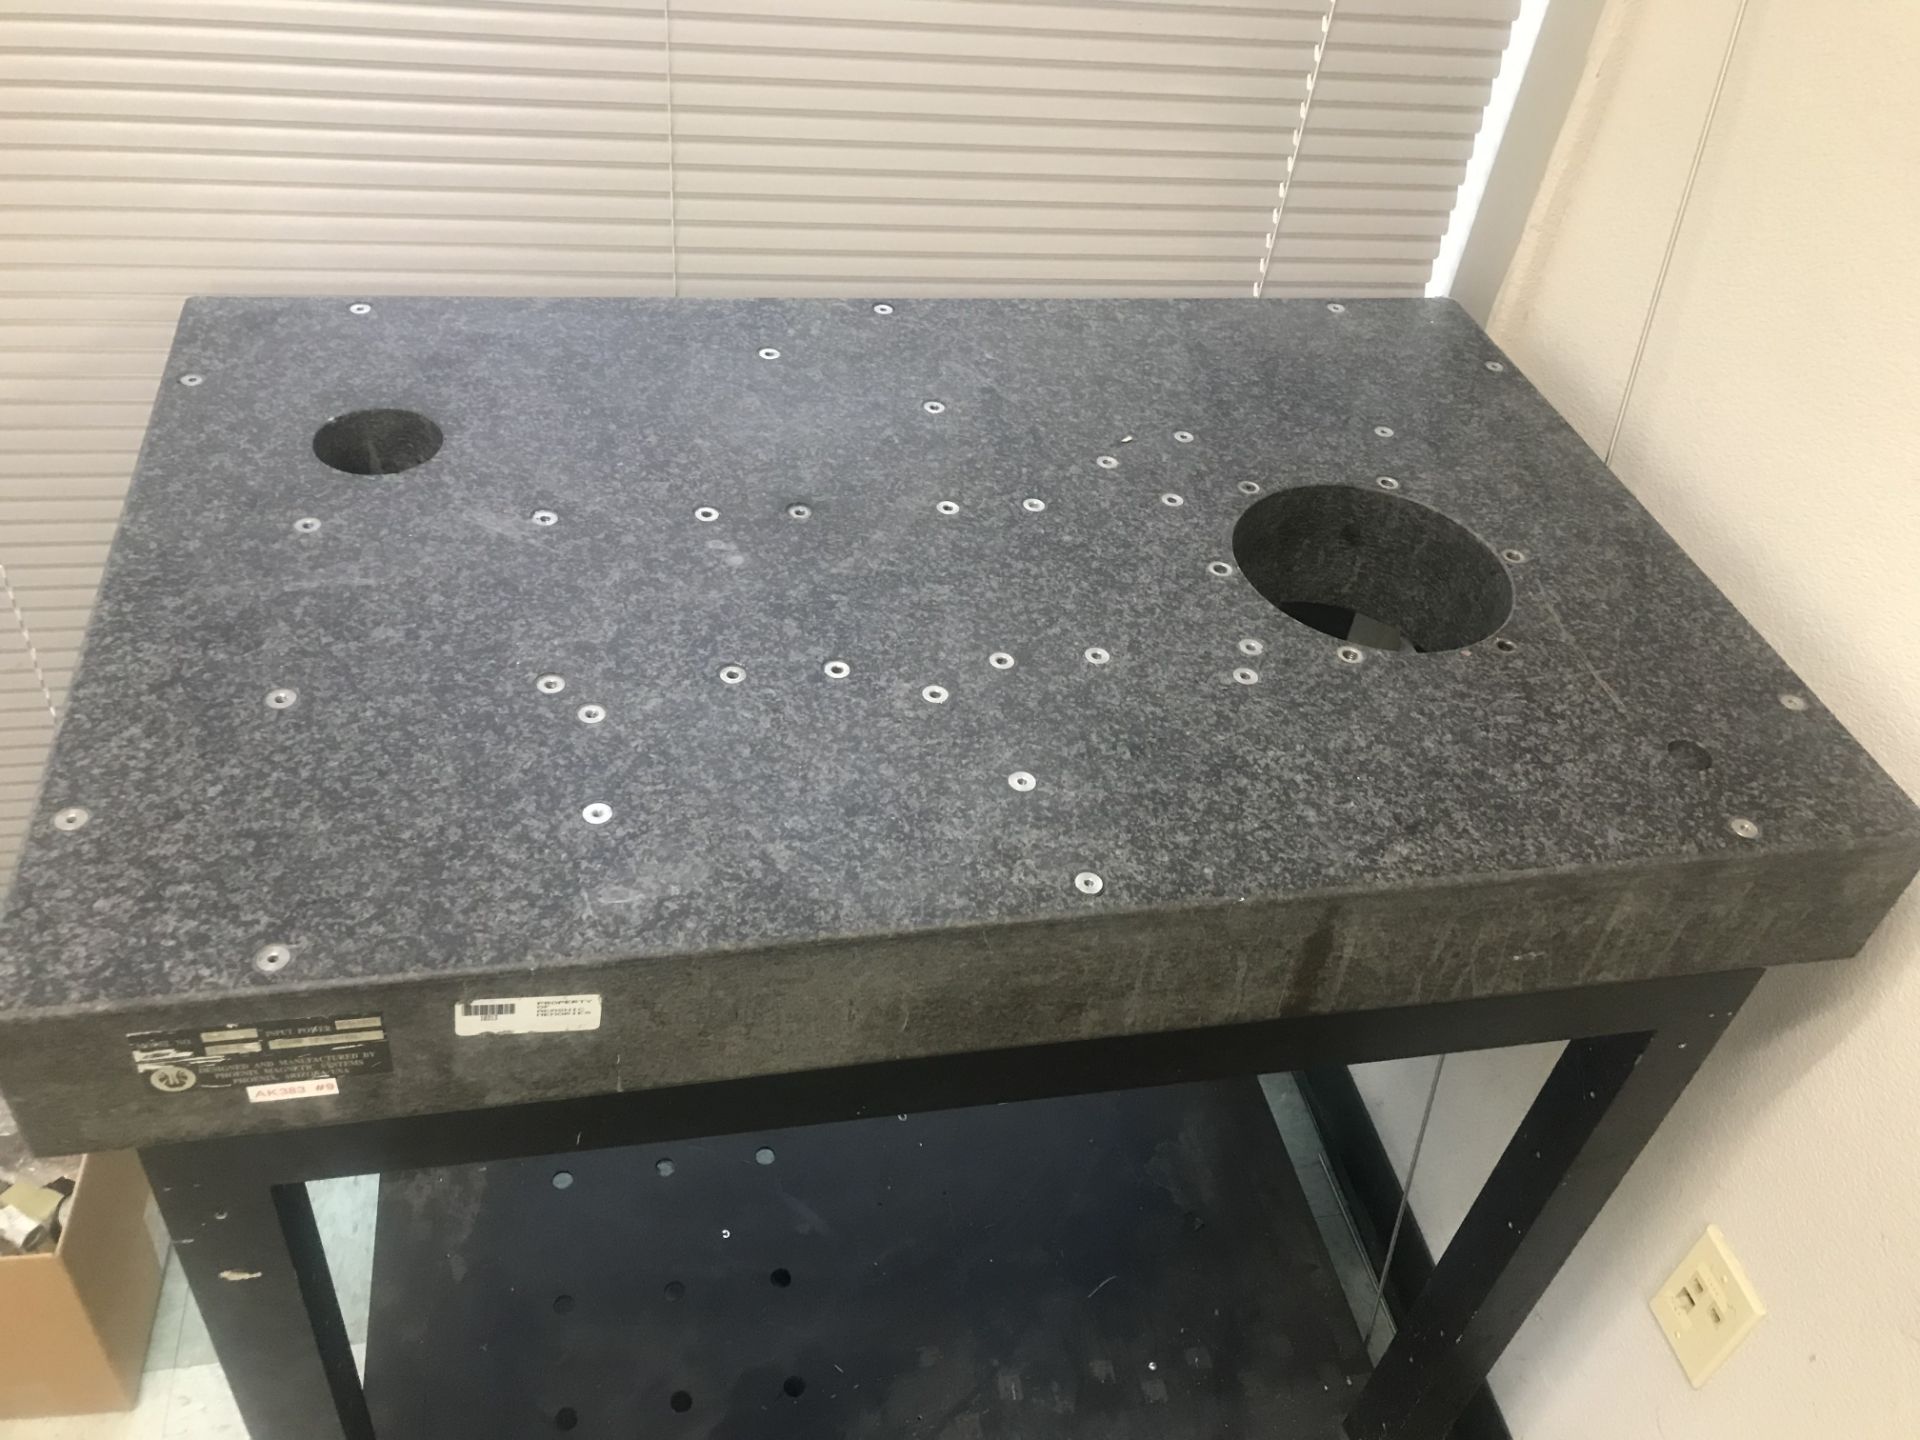 24" x 38" BLACK GRANITE SURFACE TABLE WITH ROLLING TABLE - Image 3 of 3